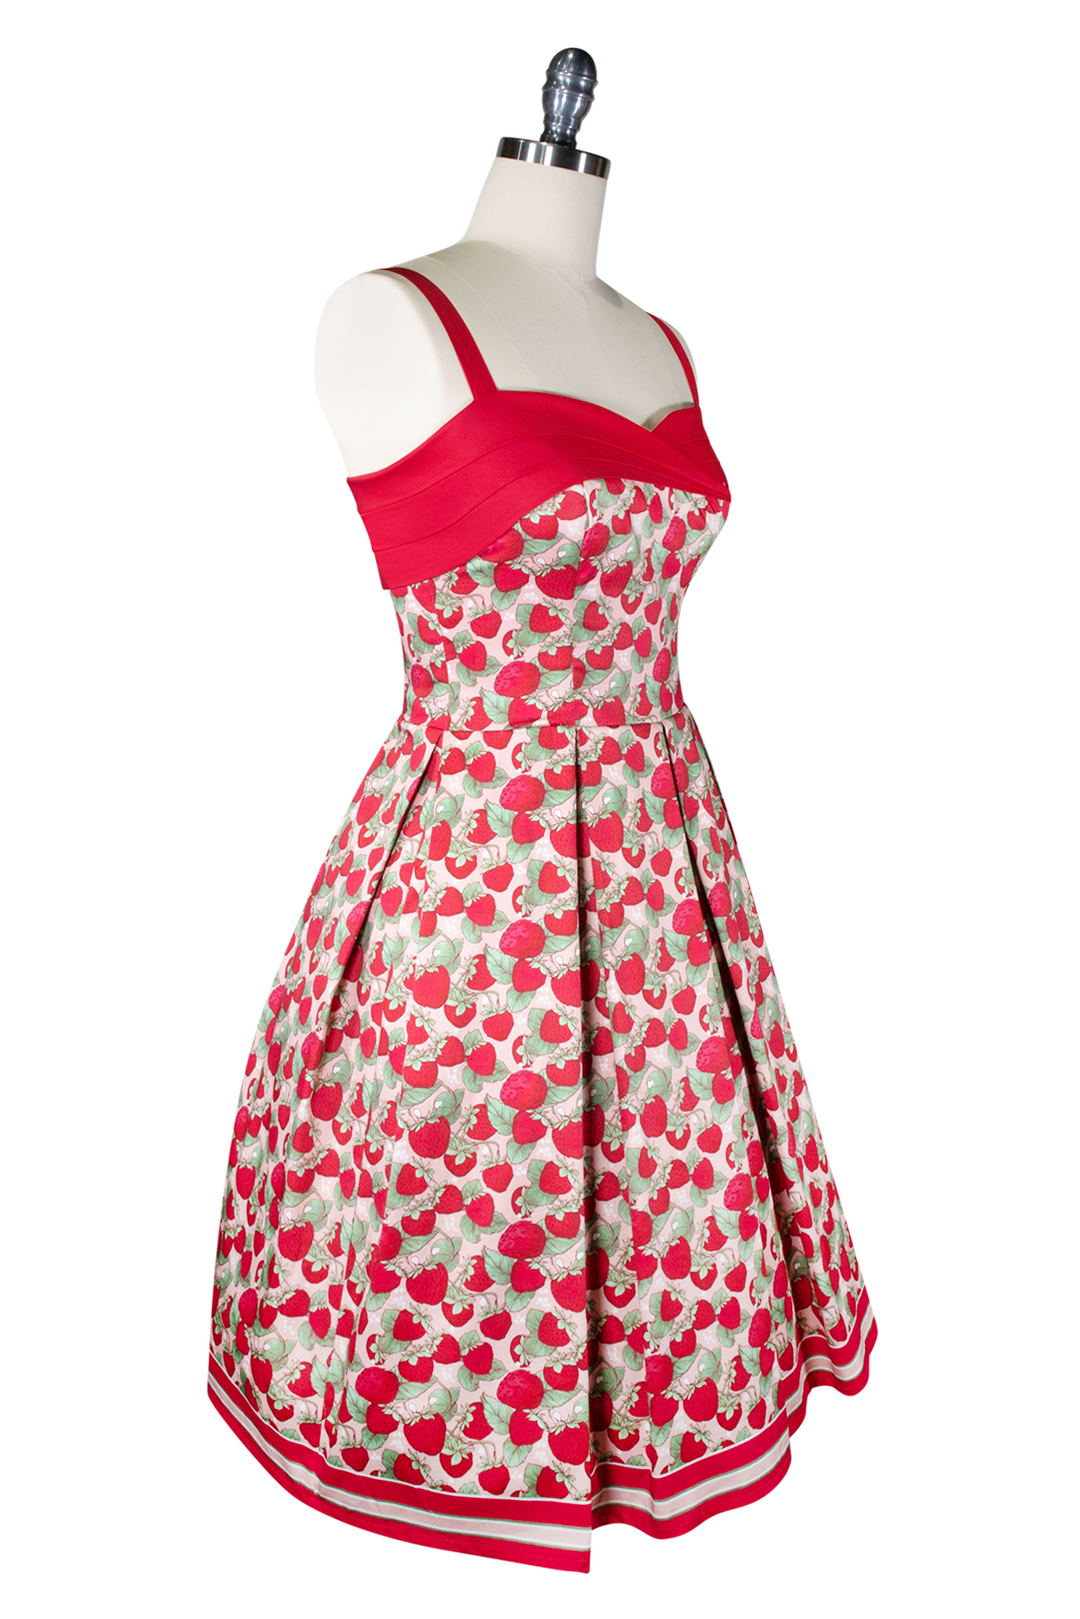 Miss Strawberry Pageant Queen Dress